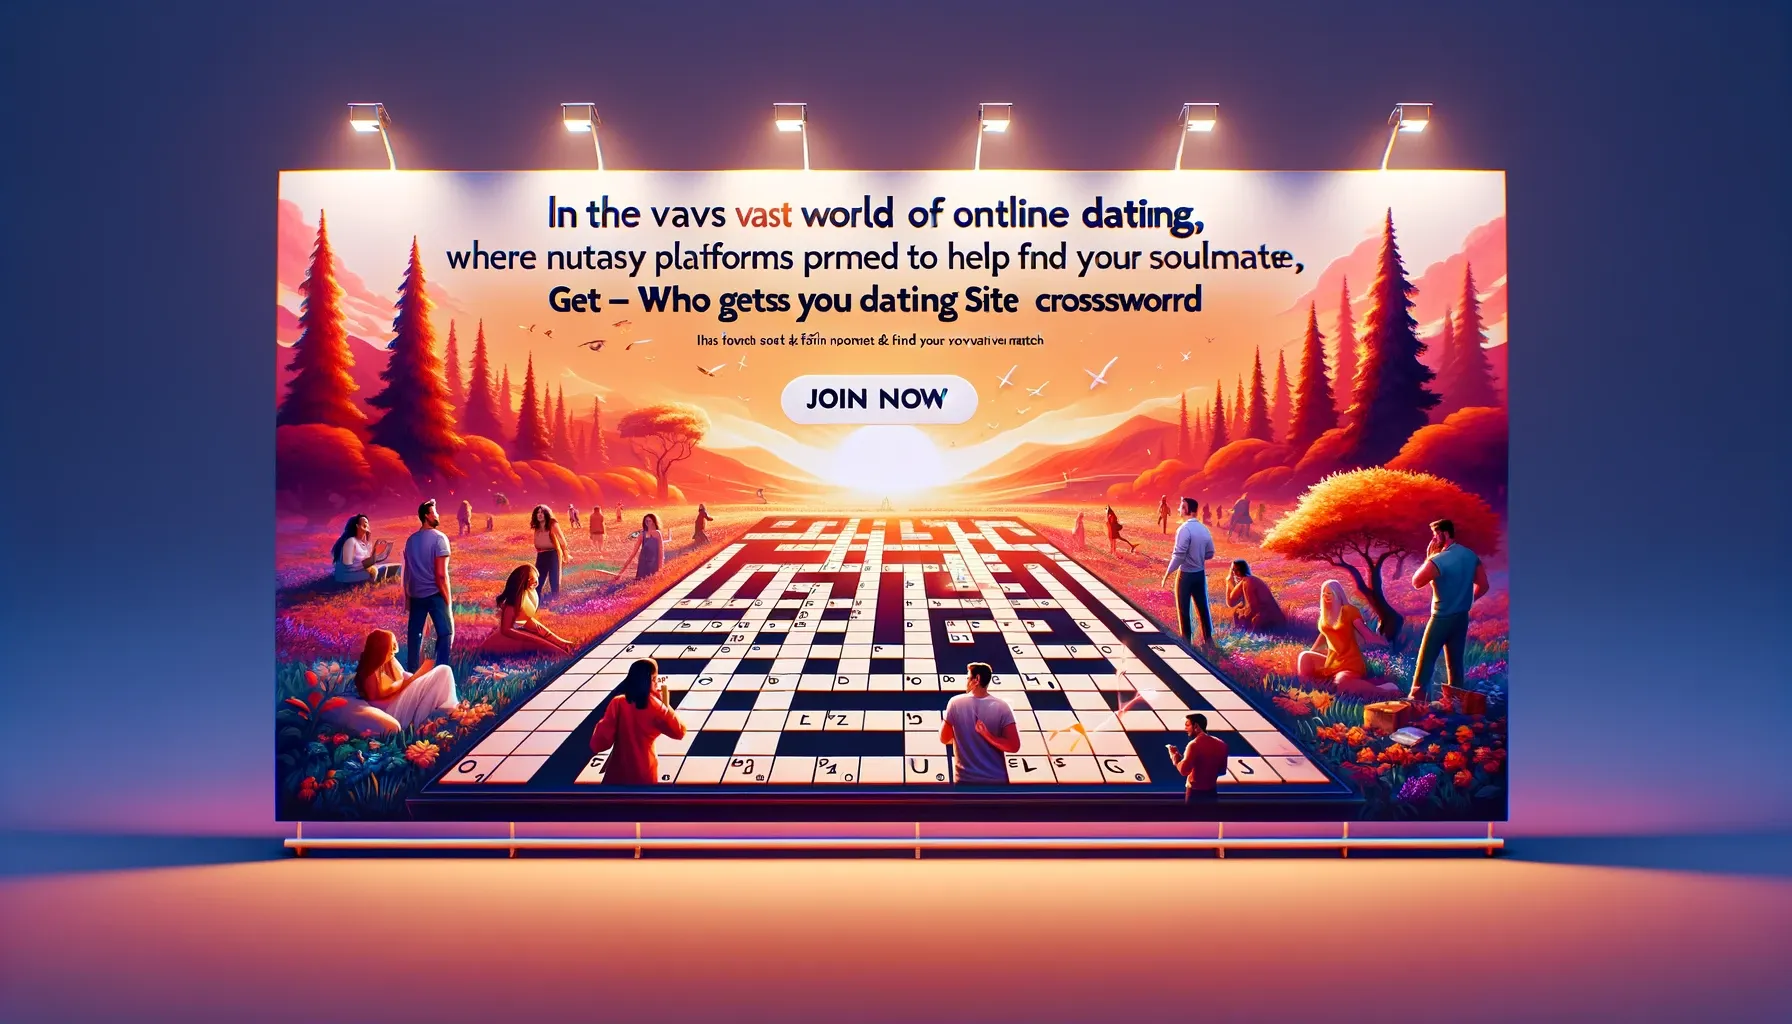 Get Who Gets You Dating Site Crossword: Find Your Perfect Match in a Unique Way